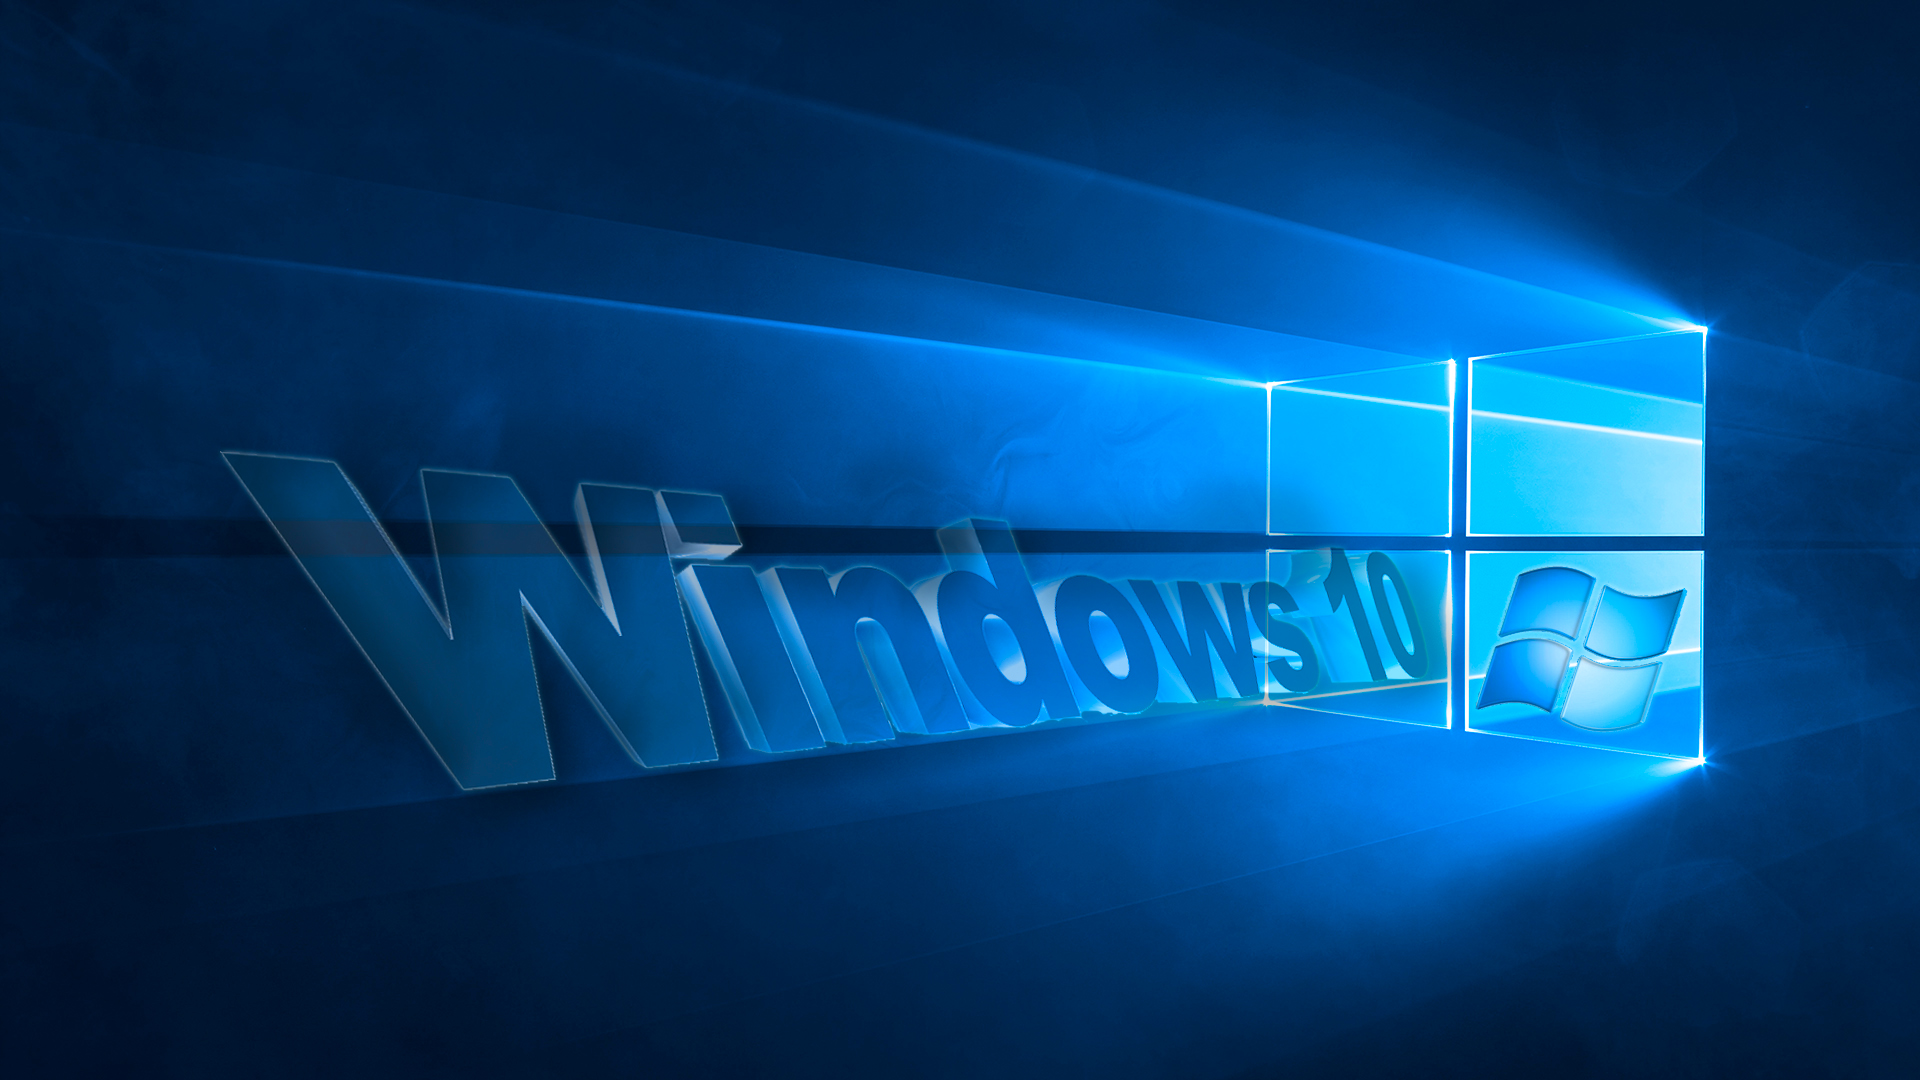 win10 professional download